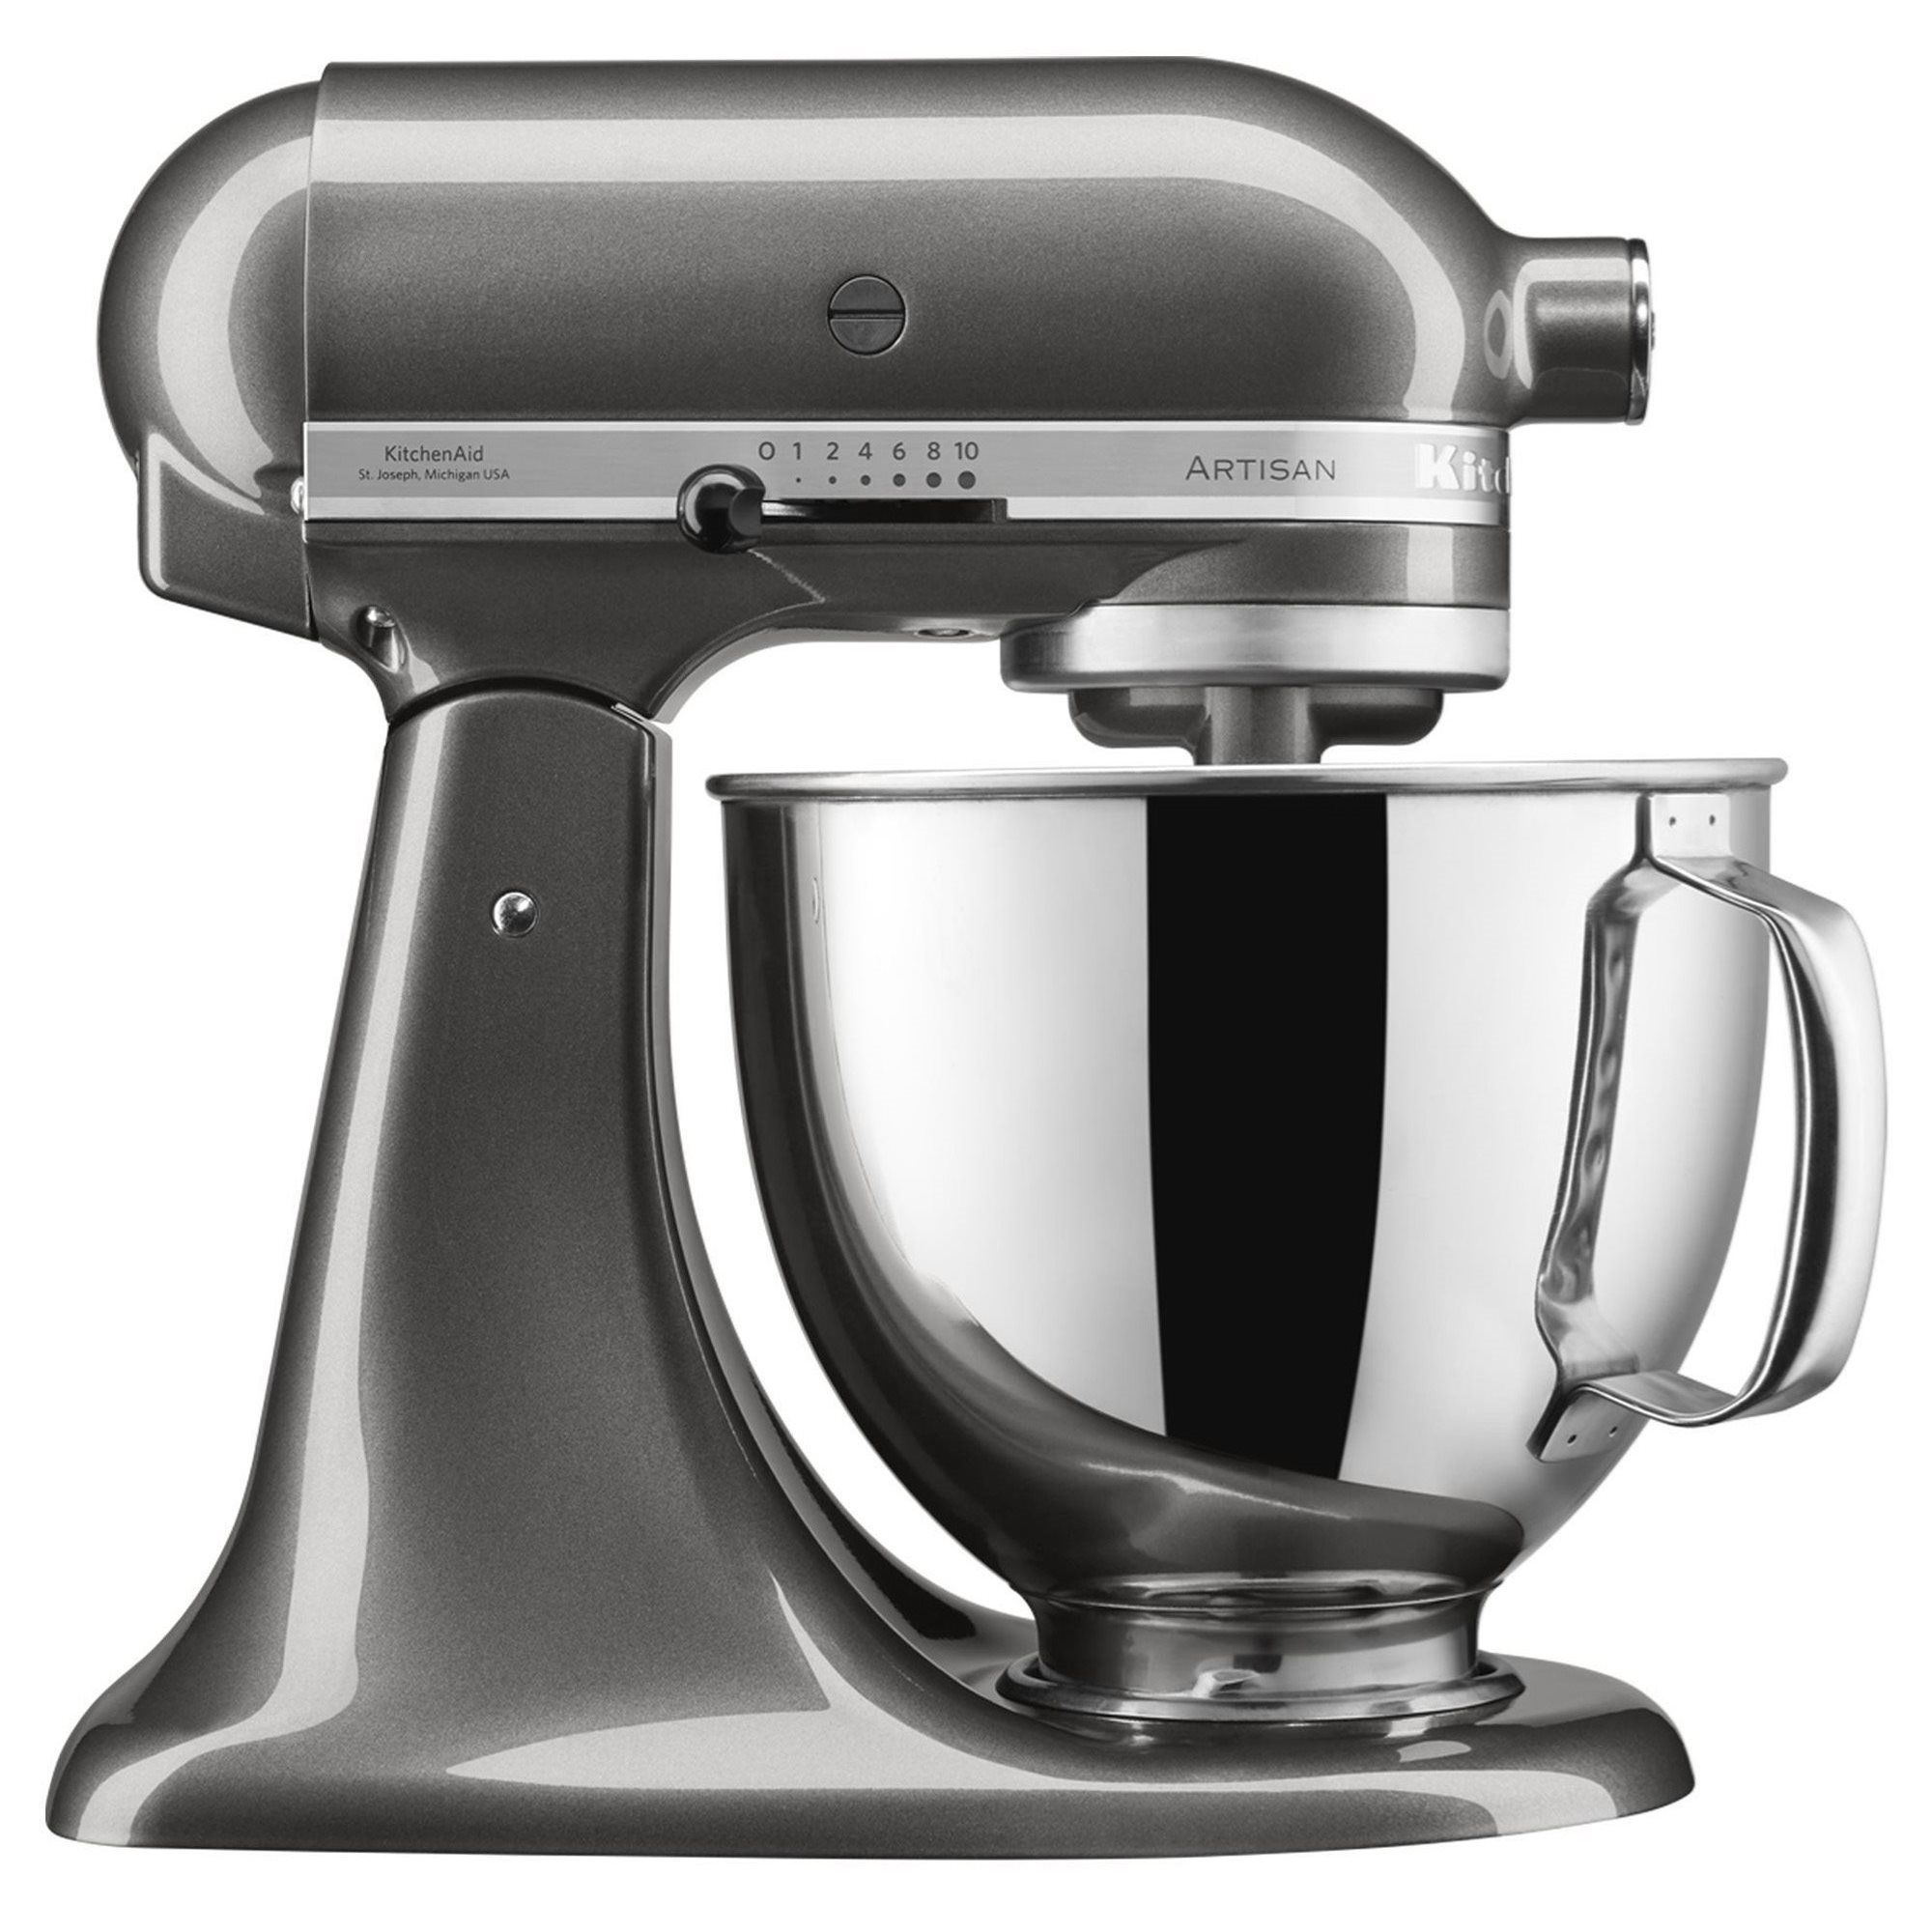 KitchenAid Residential Stainless Steel Fruit and Vegetable